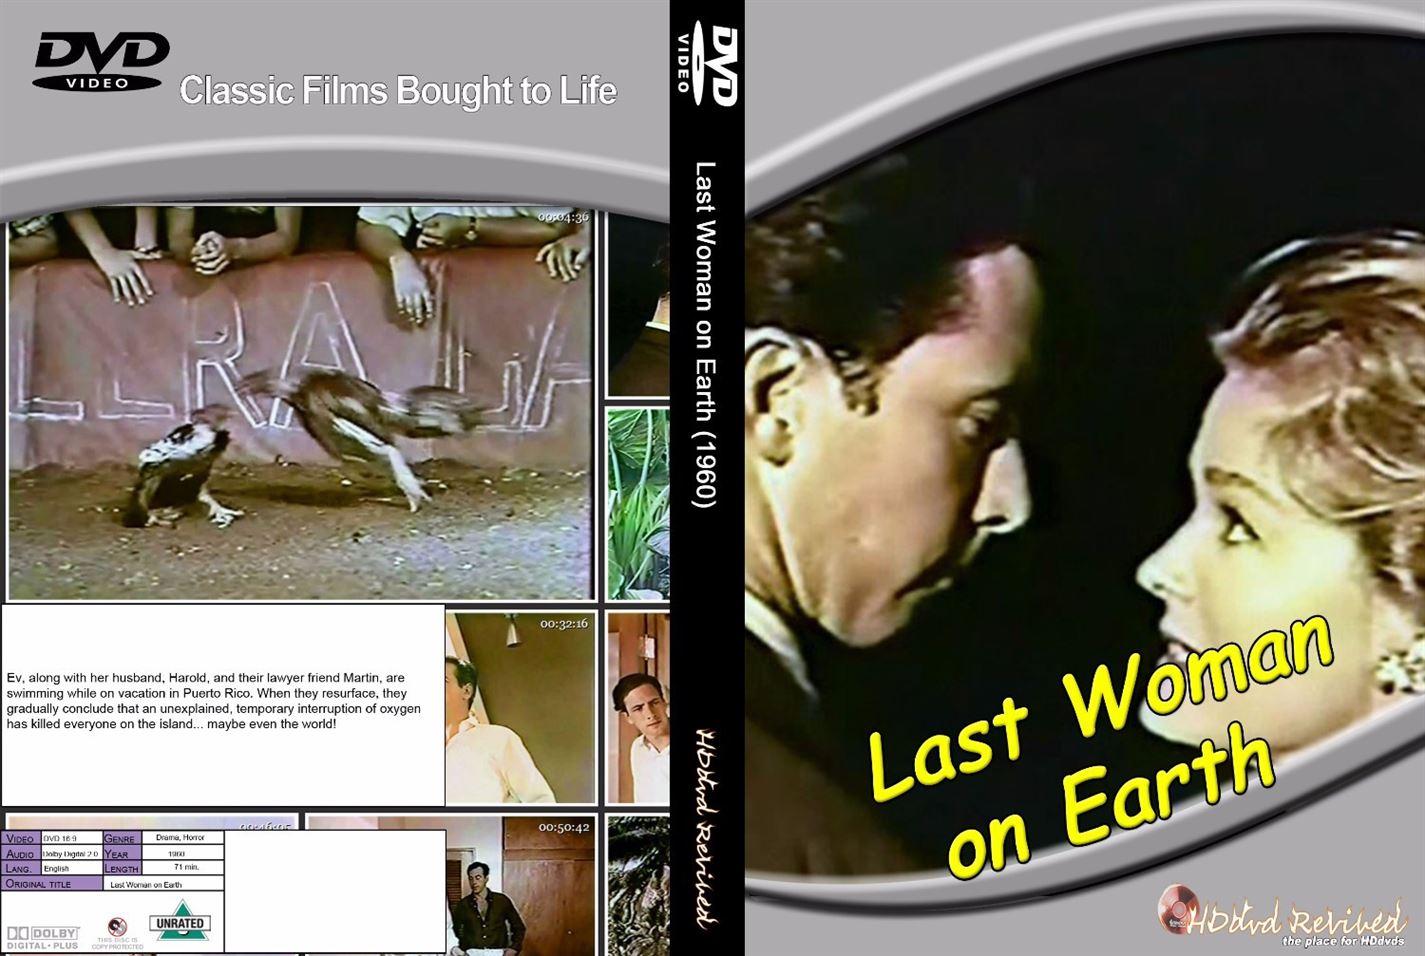 Last Woman On Earth (1960) - DVD - (HDDVD-Revived) - NEW - UK SELLER